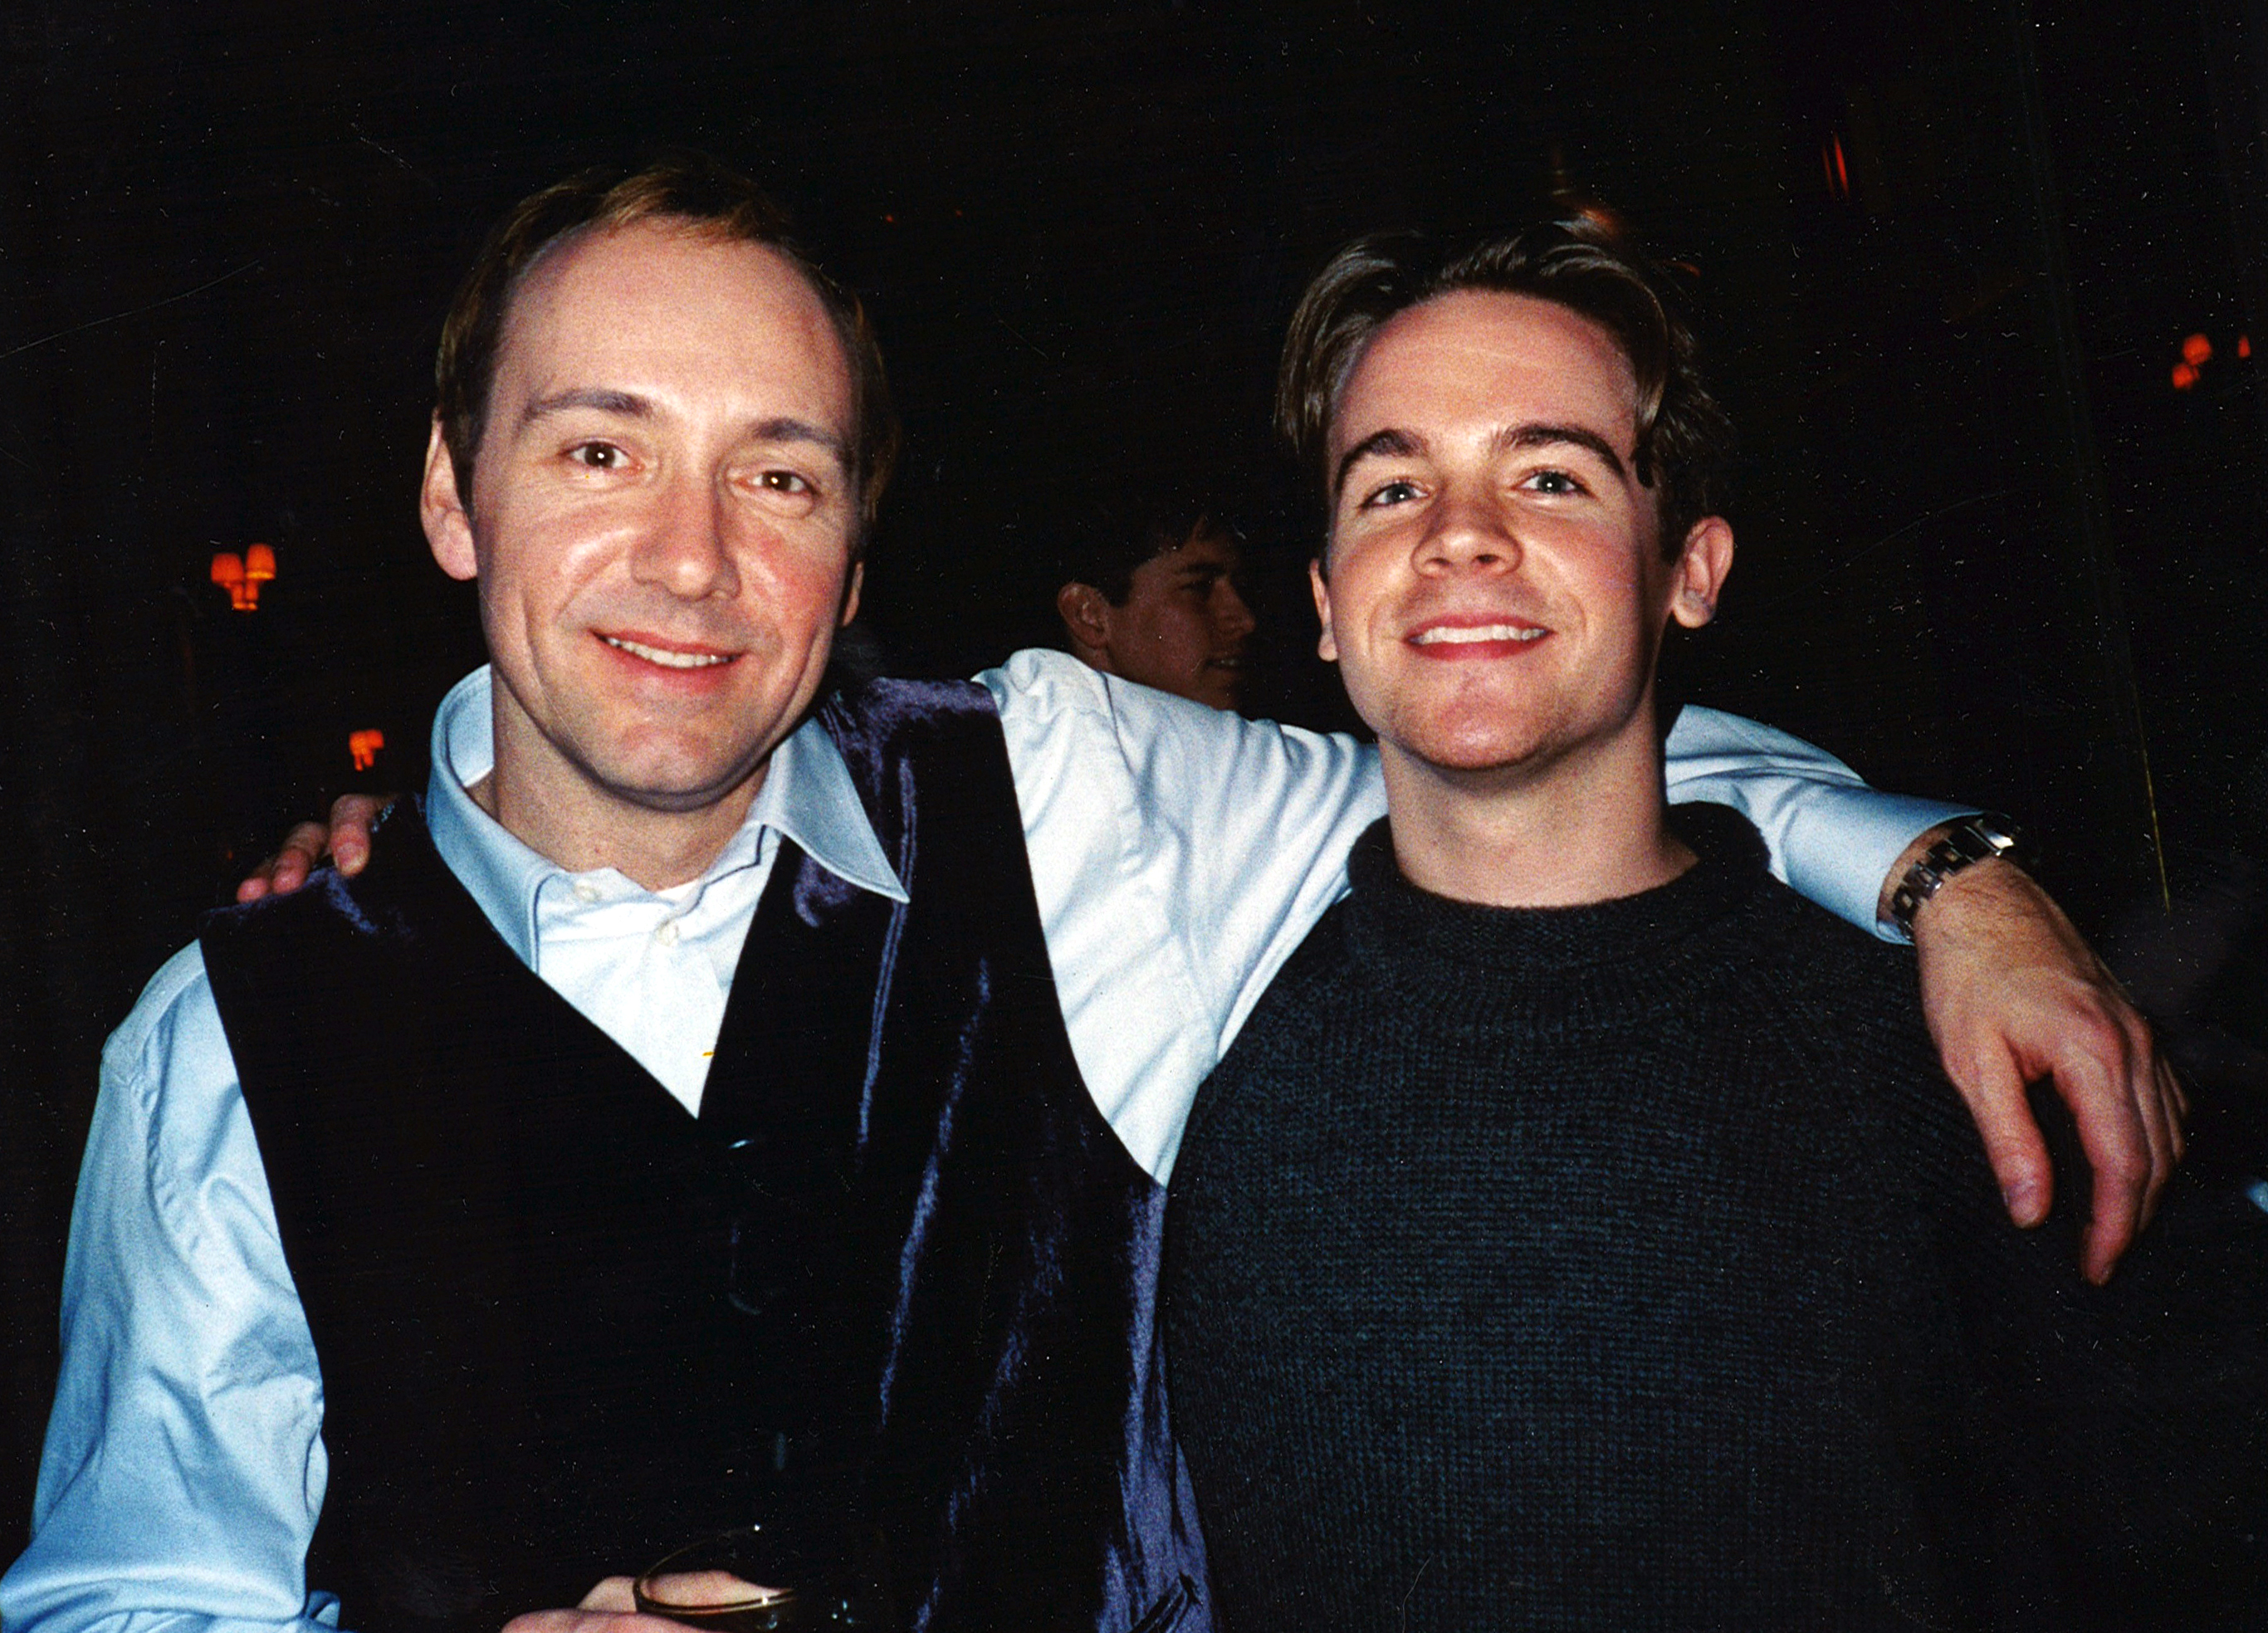 Kevin Spacey and Craig Watkinson, Saturday Night Live after-party, NYC, 1997.